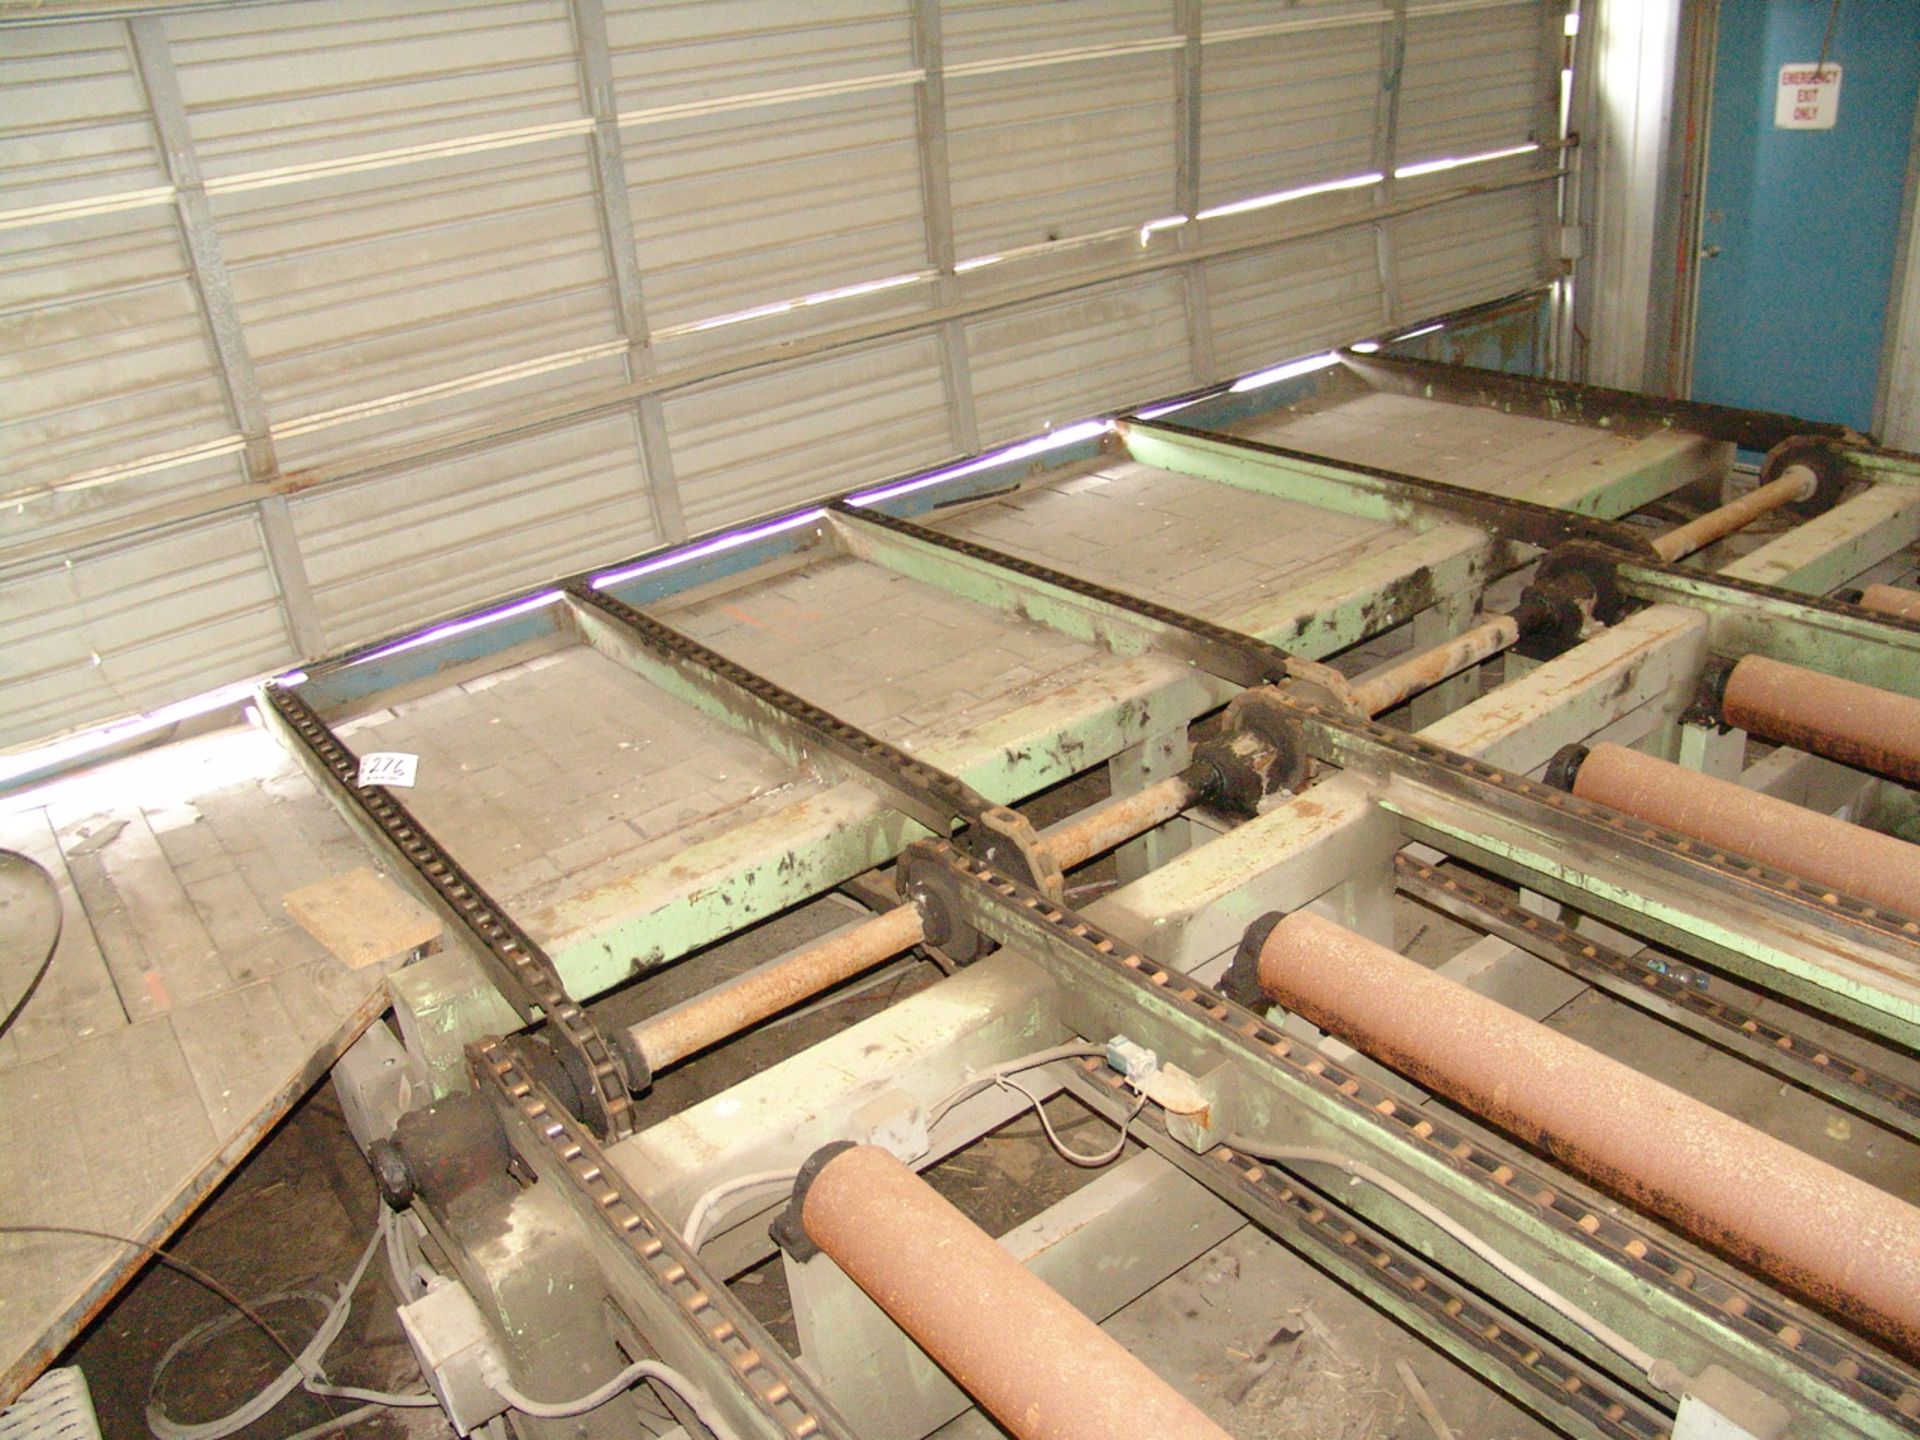 SECONDARY PACKAGE INFEED TRANSFER, 15' X 12' (FROM OUTSIDE)